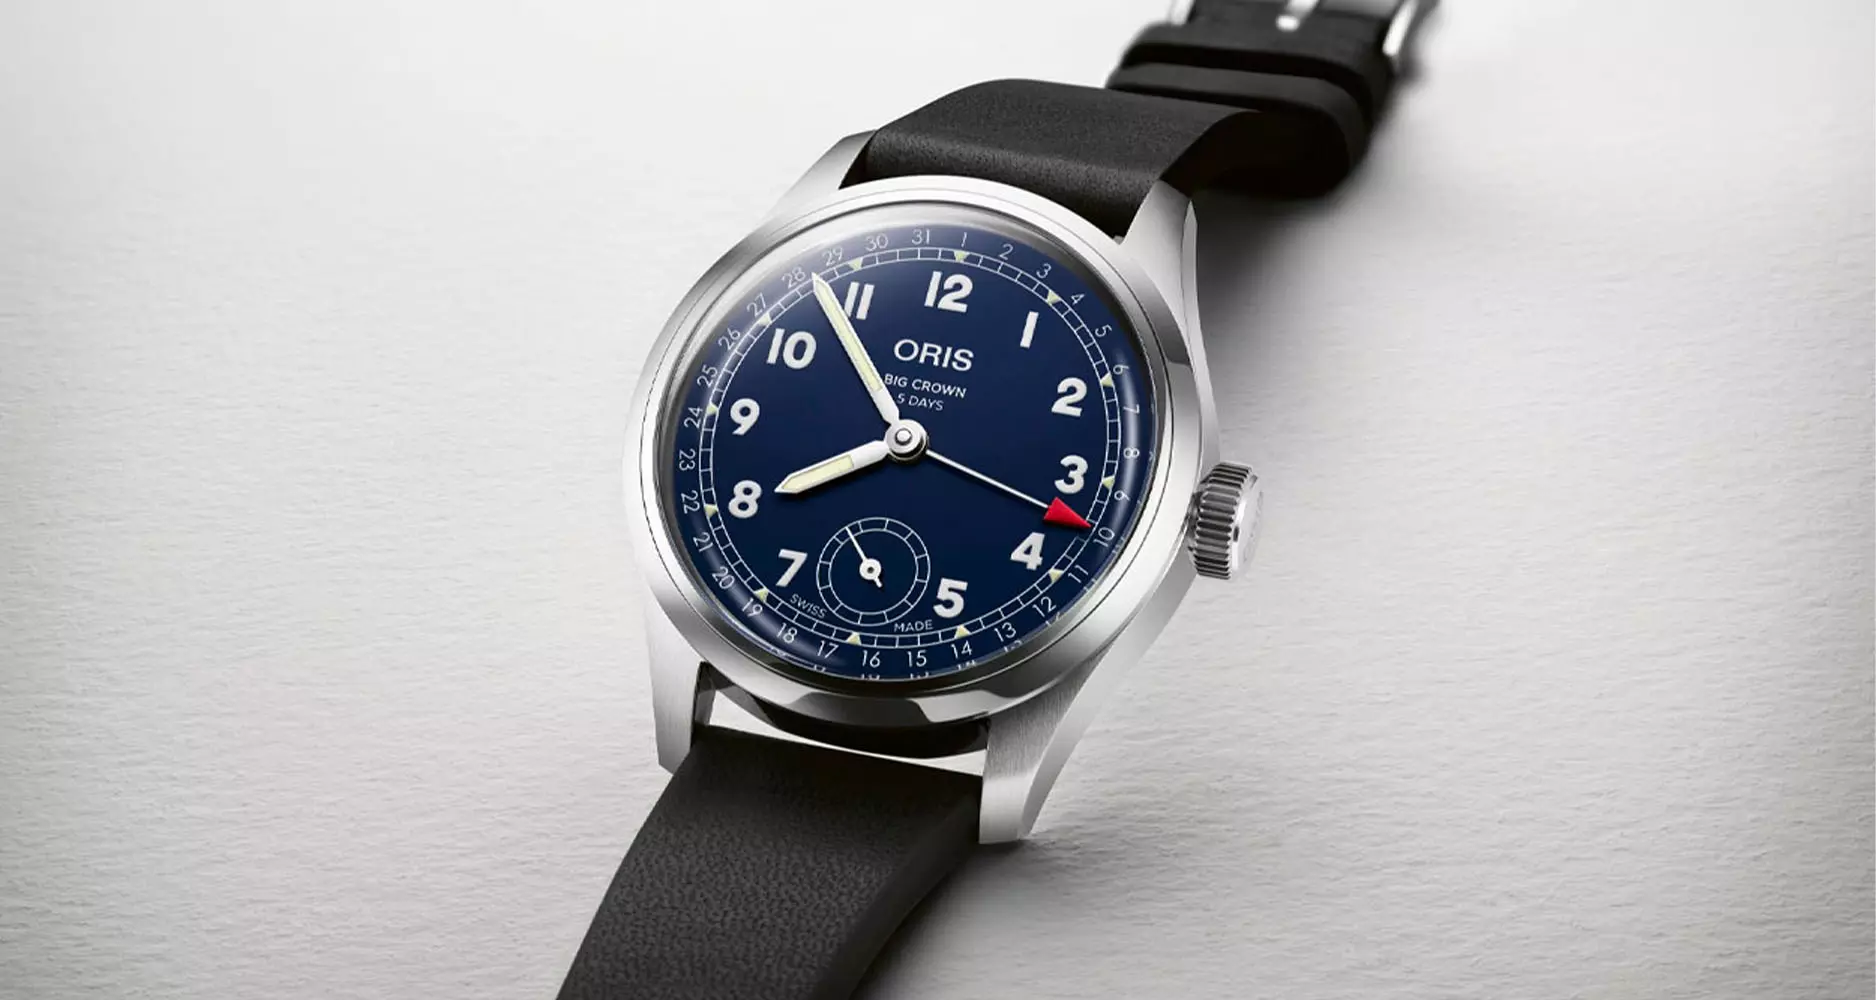 The Oris Big Crown Pointer Date with self-winding Calibre 403.